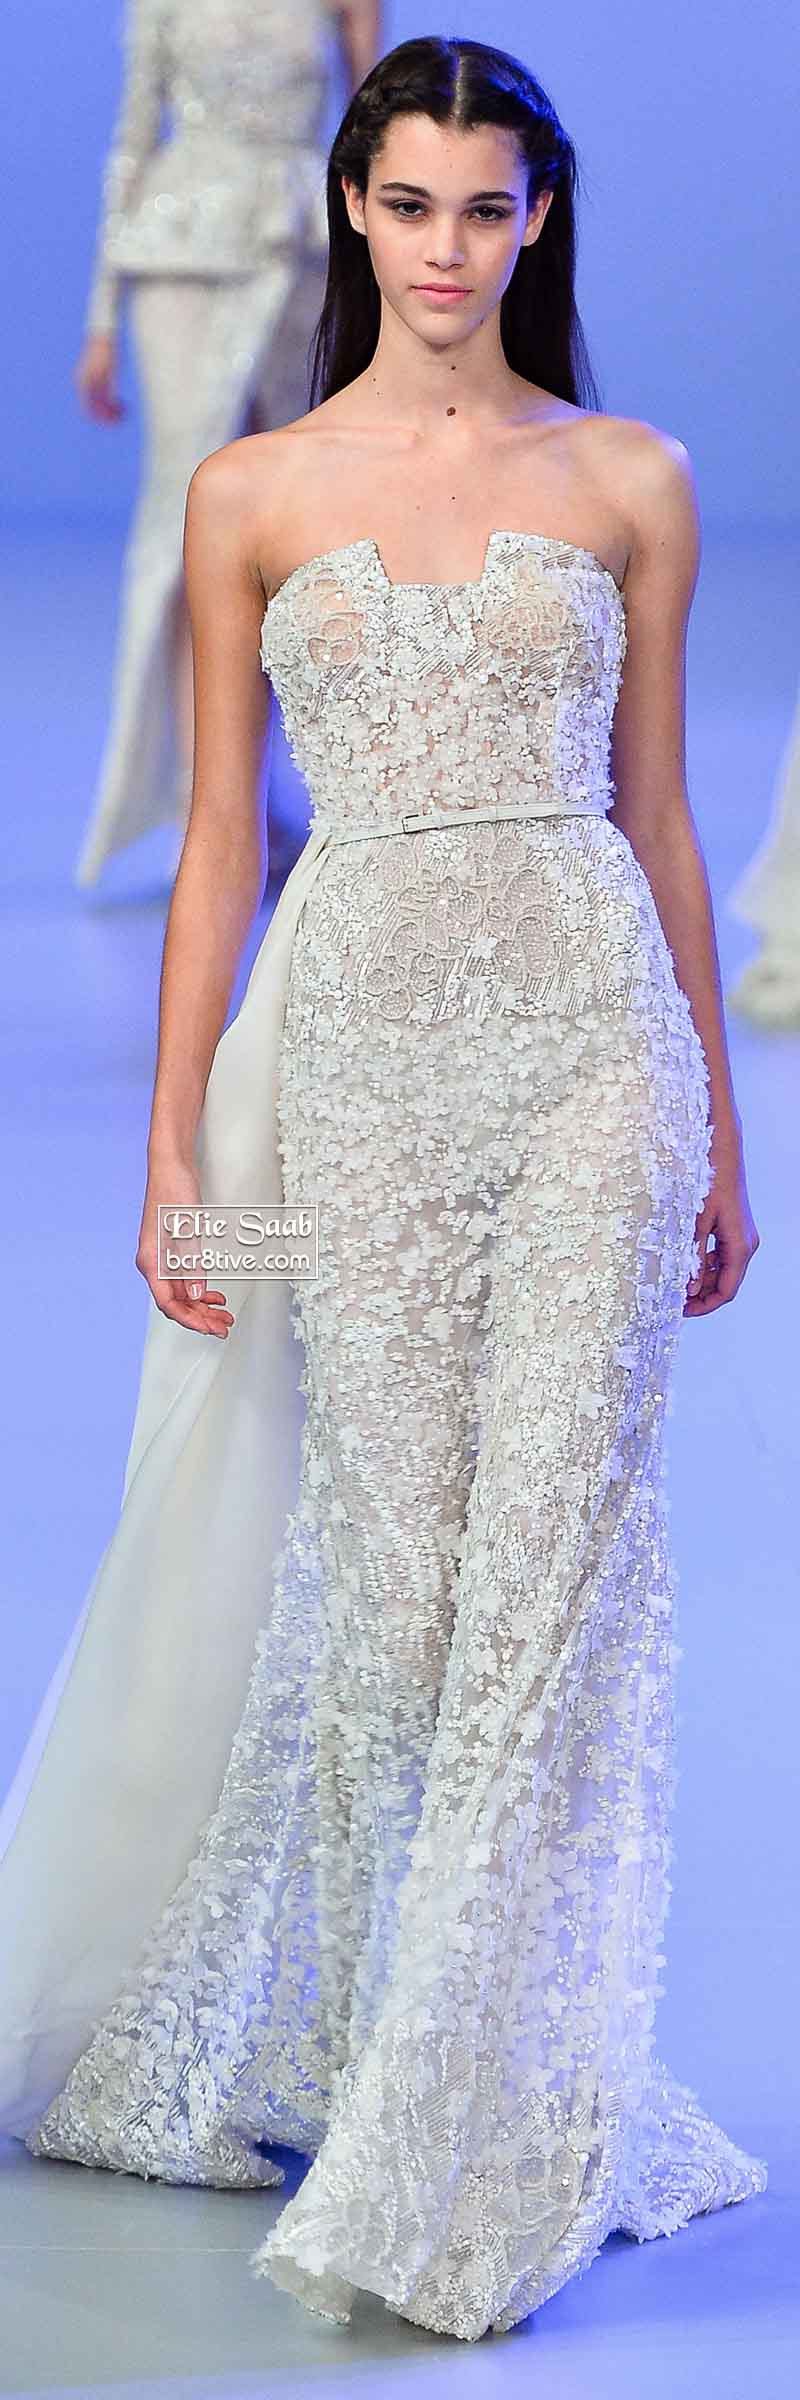 Elie Saab Spring 2014 Couture Collection – Be Creative